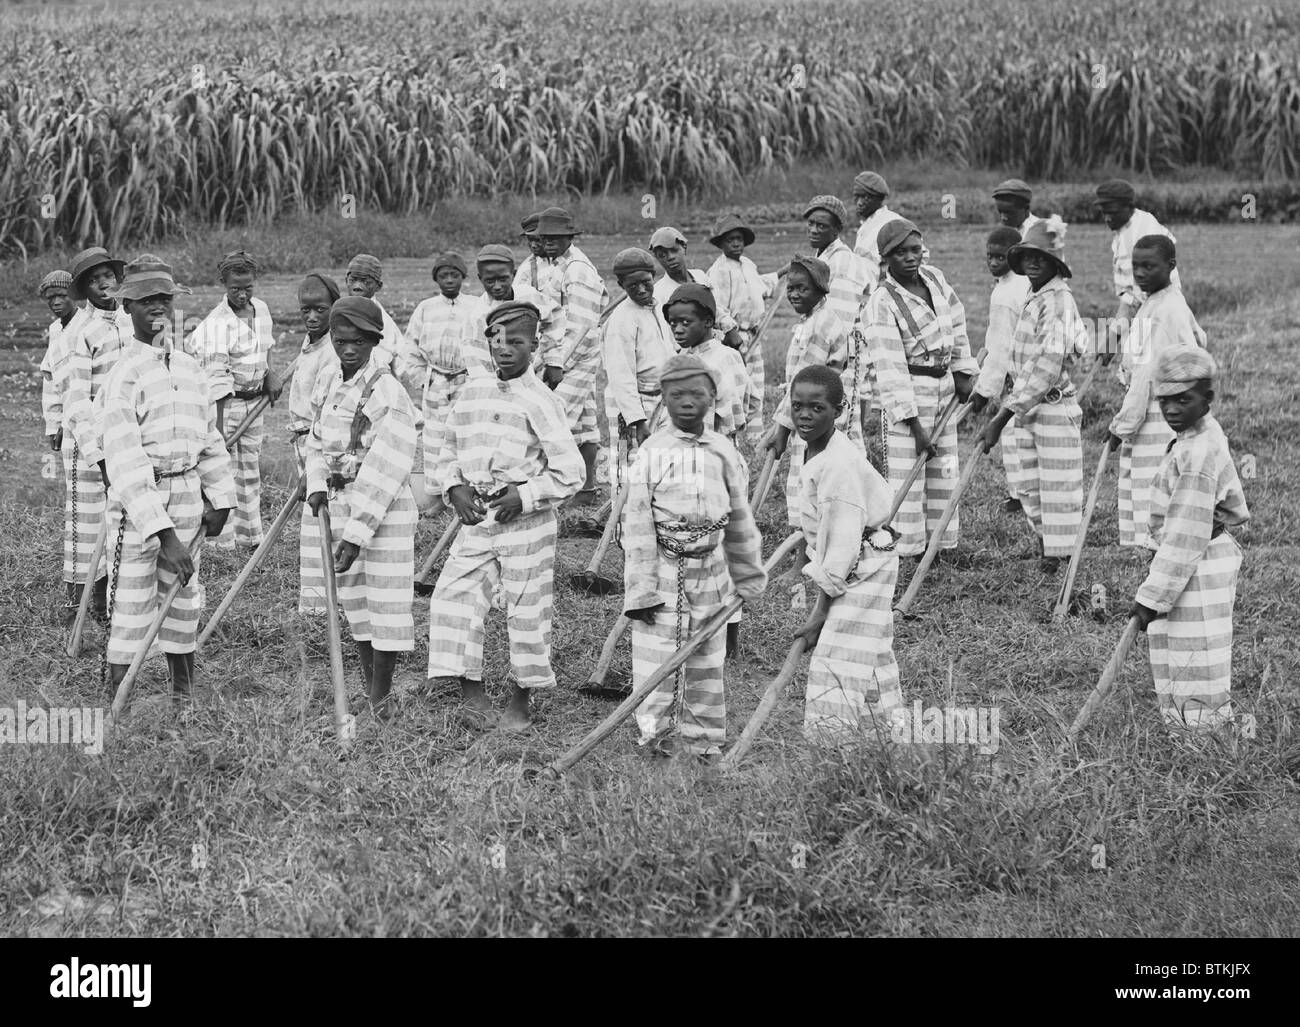 Juvenile convicts at work in the fields in s Southern chain gang. Southern jails made money leasing convicts for forced labor in the Jim Crow South. Circa. 1903 Stock Photo